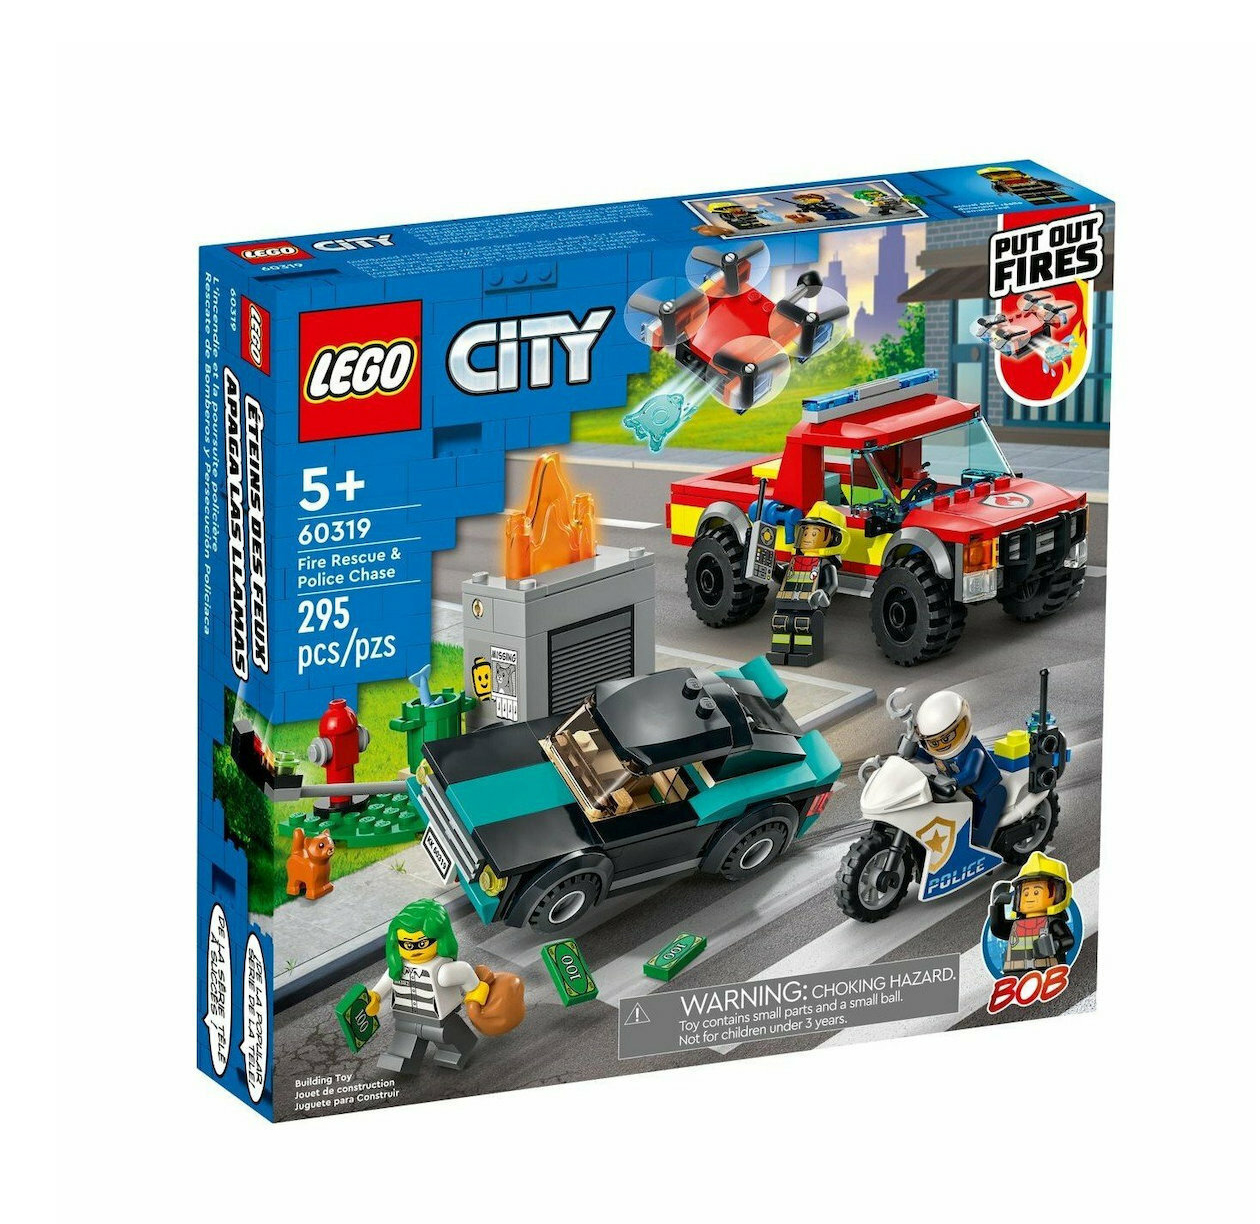 Lego City: Fire Rescue Police Chase 60319